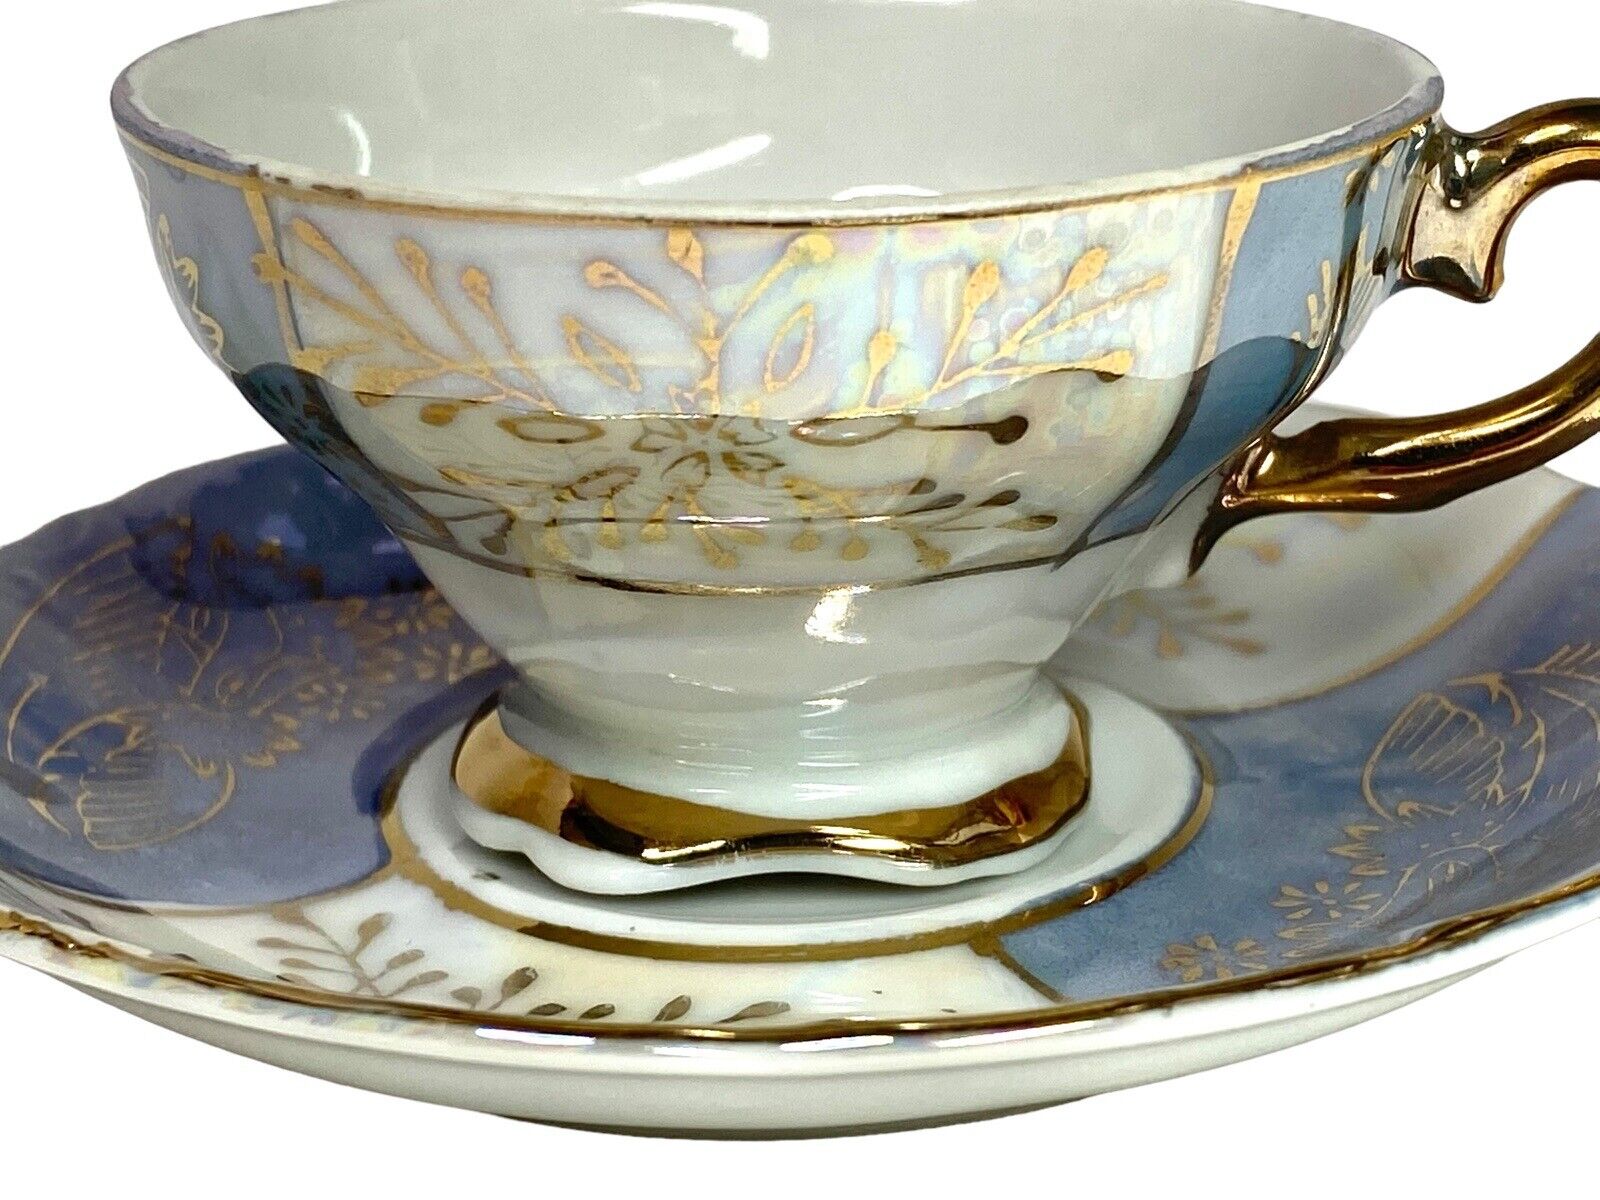 Vintage Pearlescent Demitasse Espresso Cup And Saucer Blue White Gold Foliage